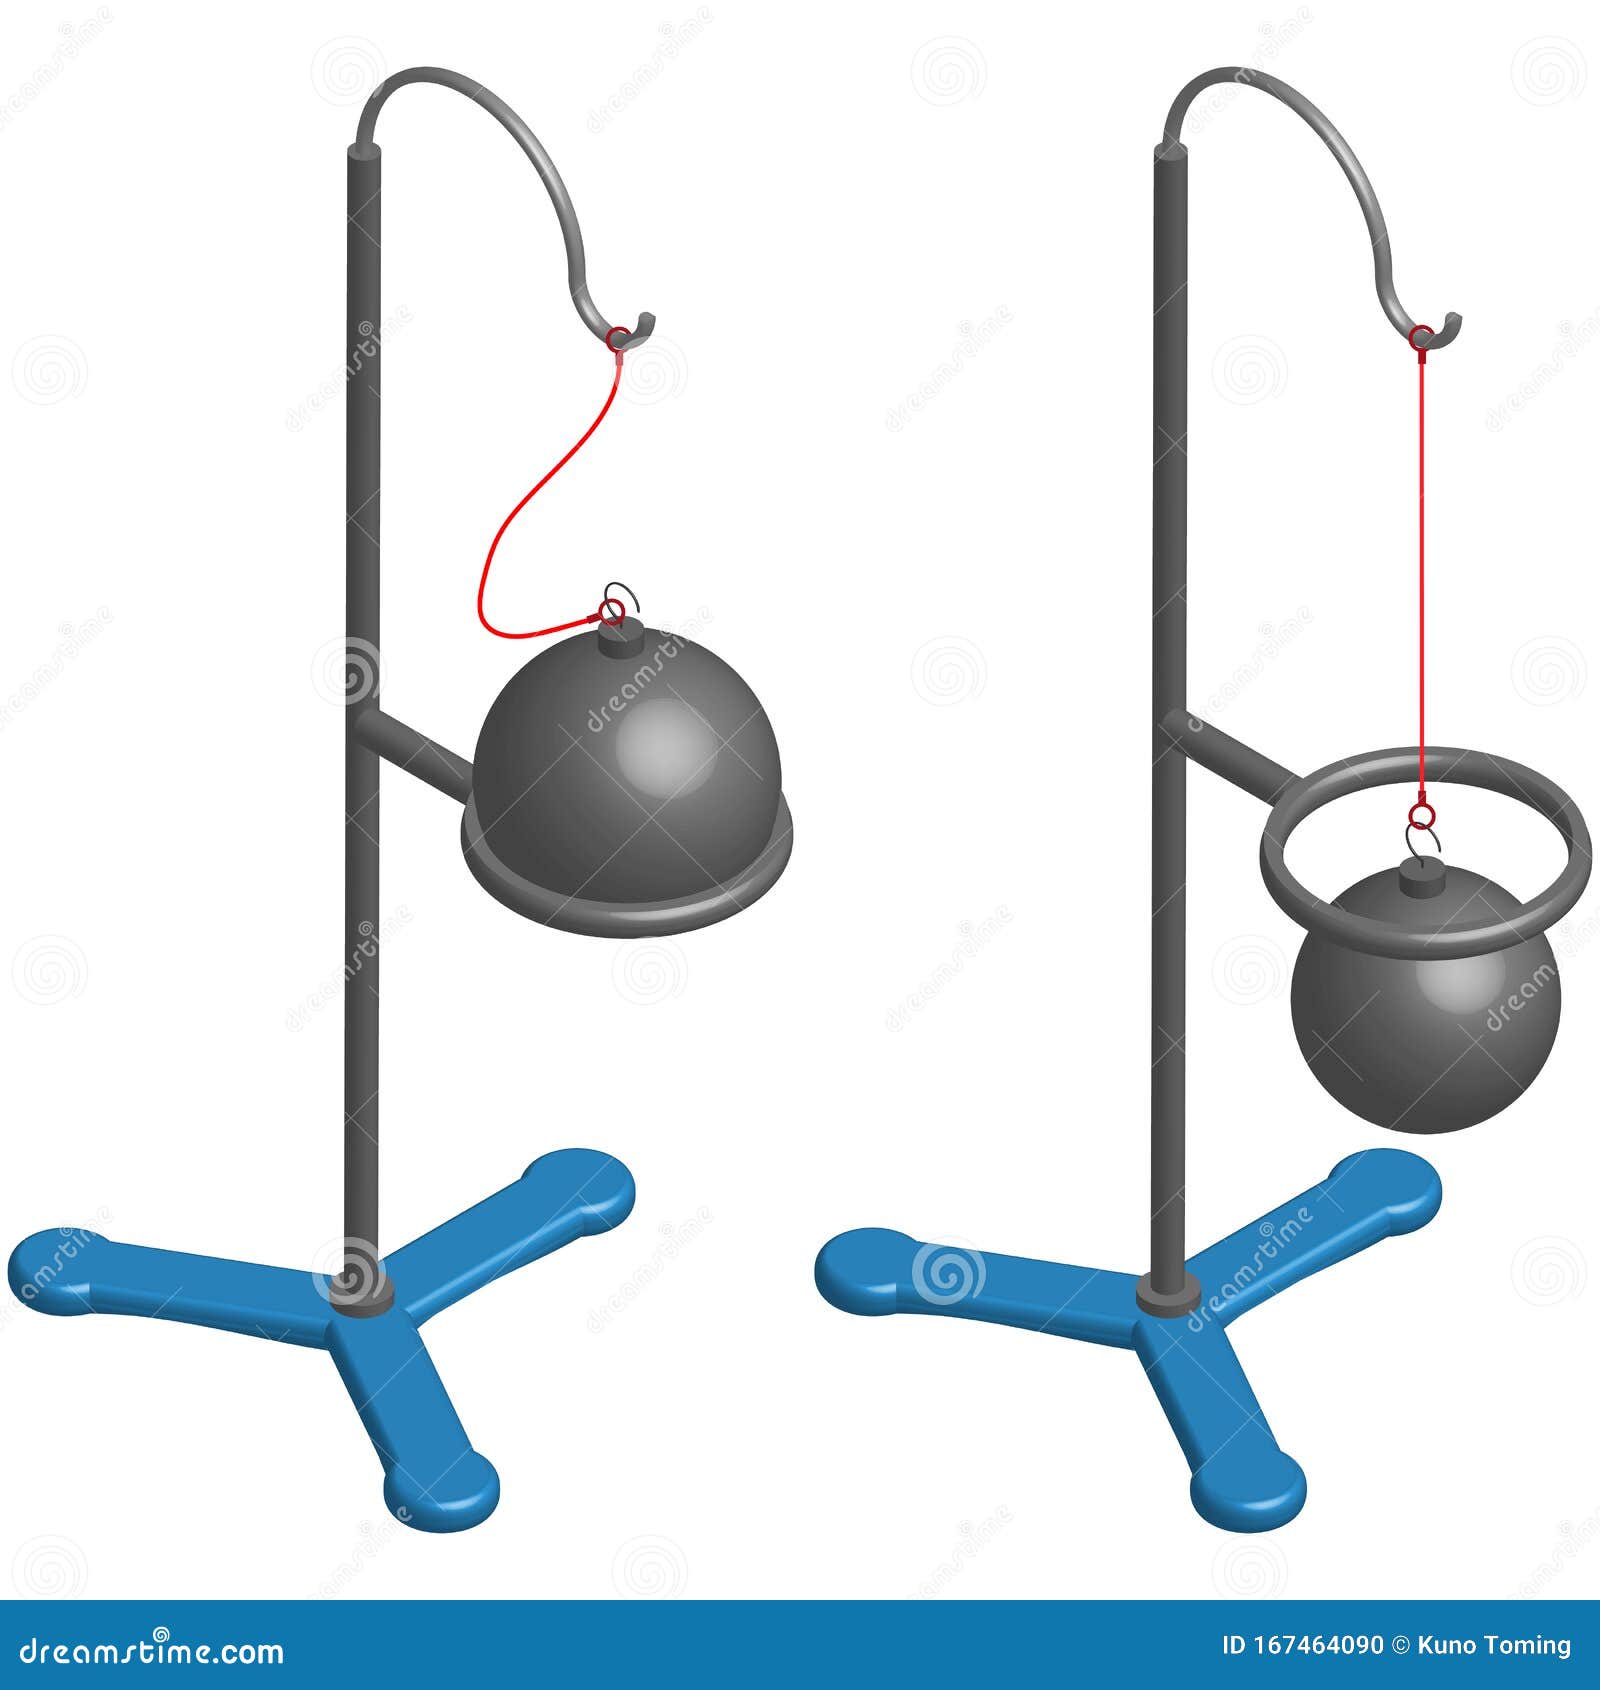 Expansion of Solids | ClipArt ETC